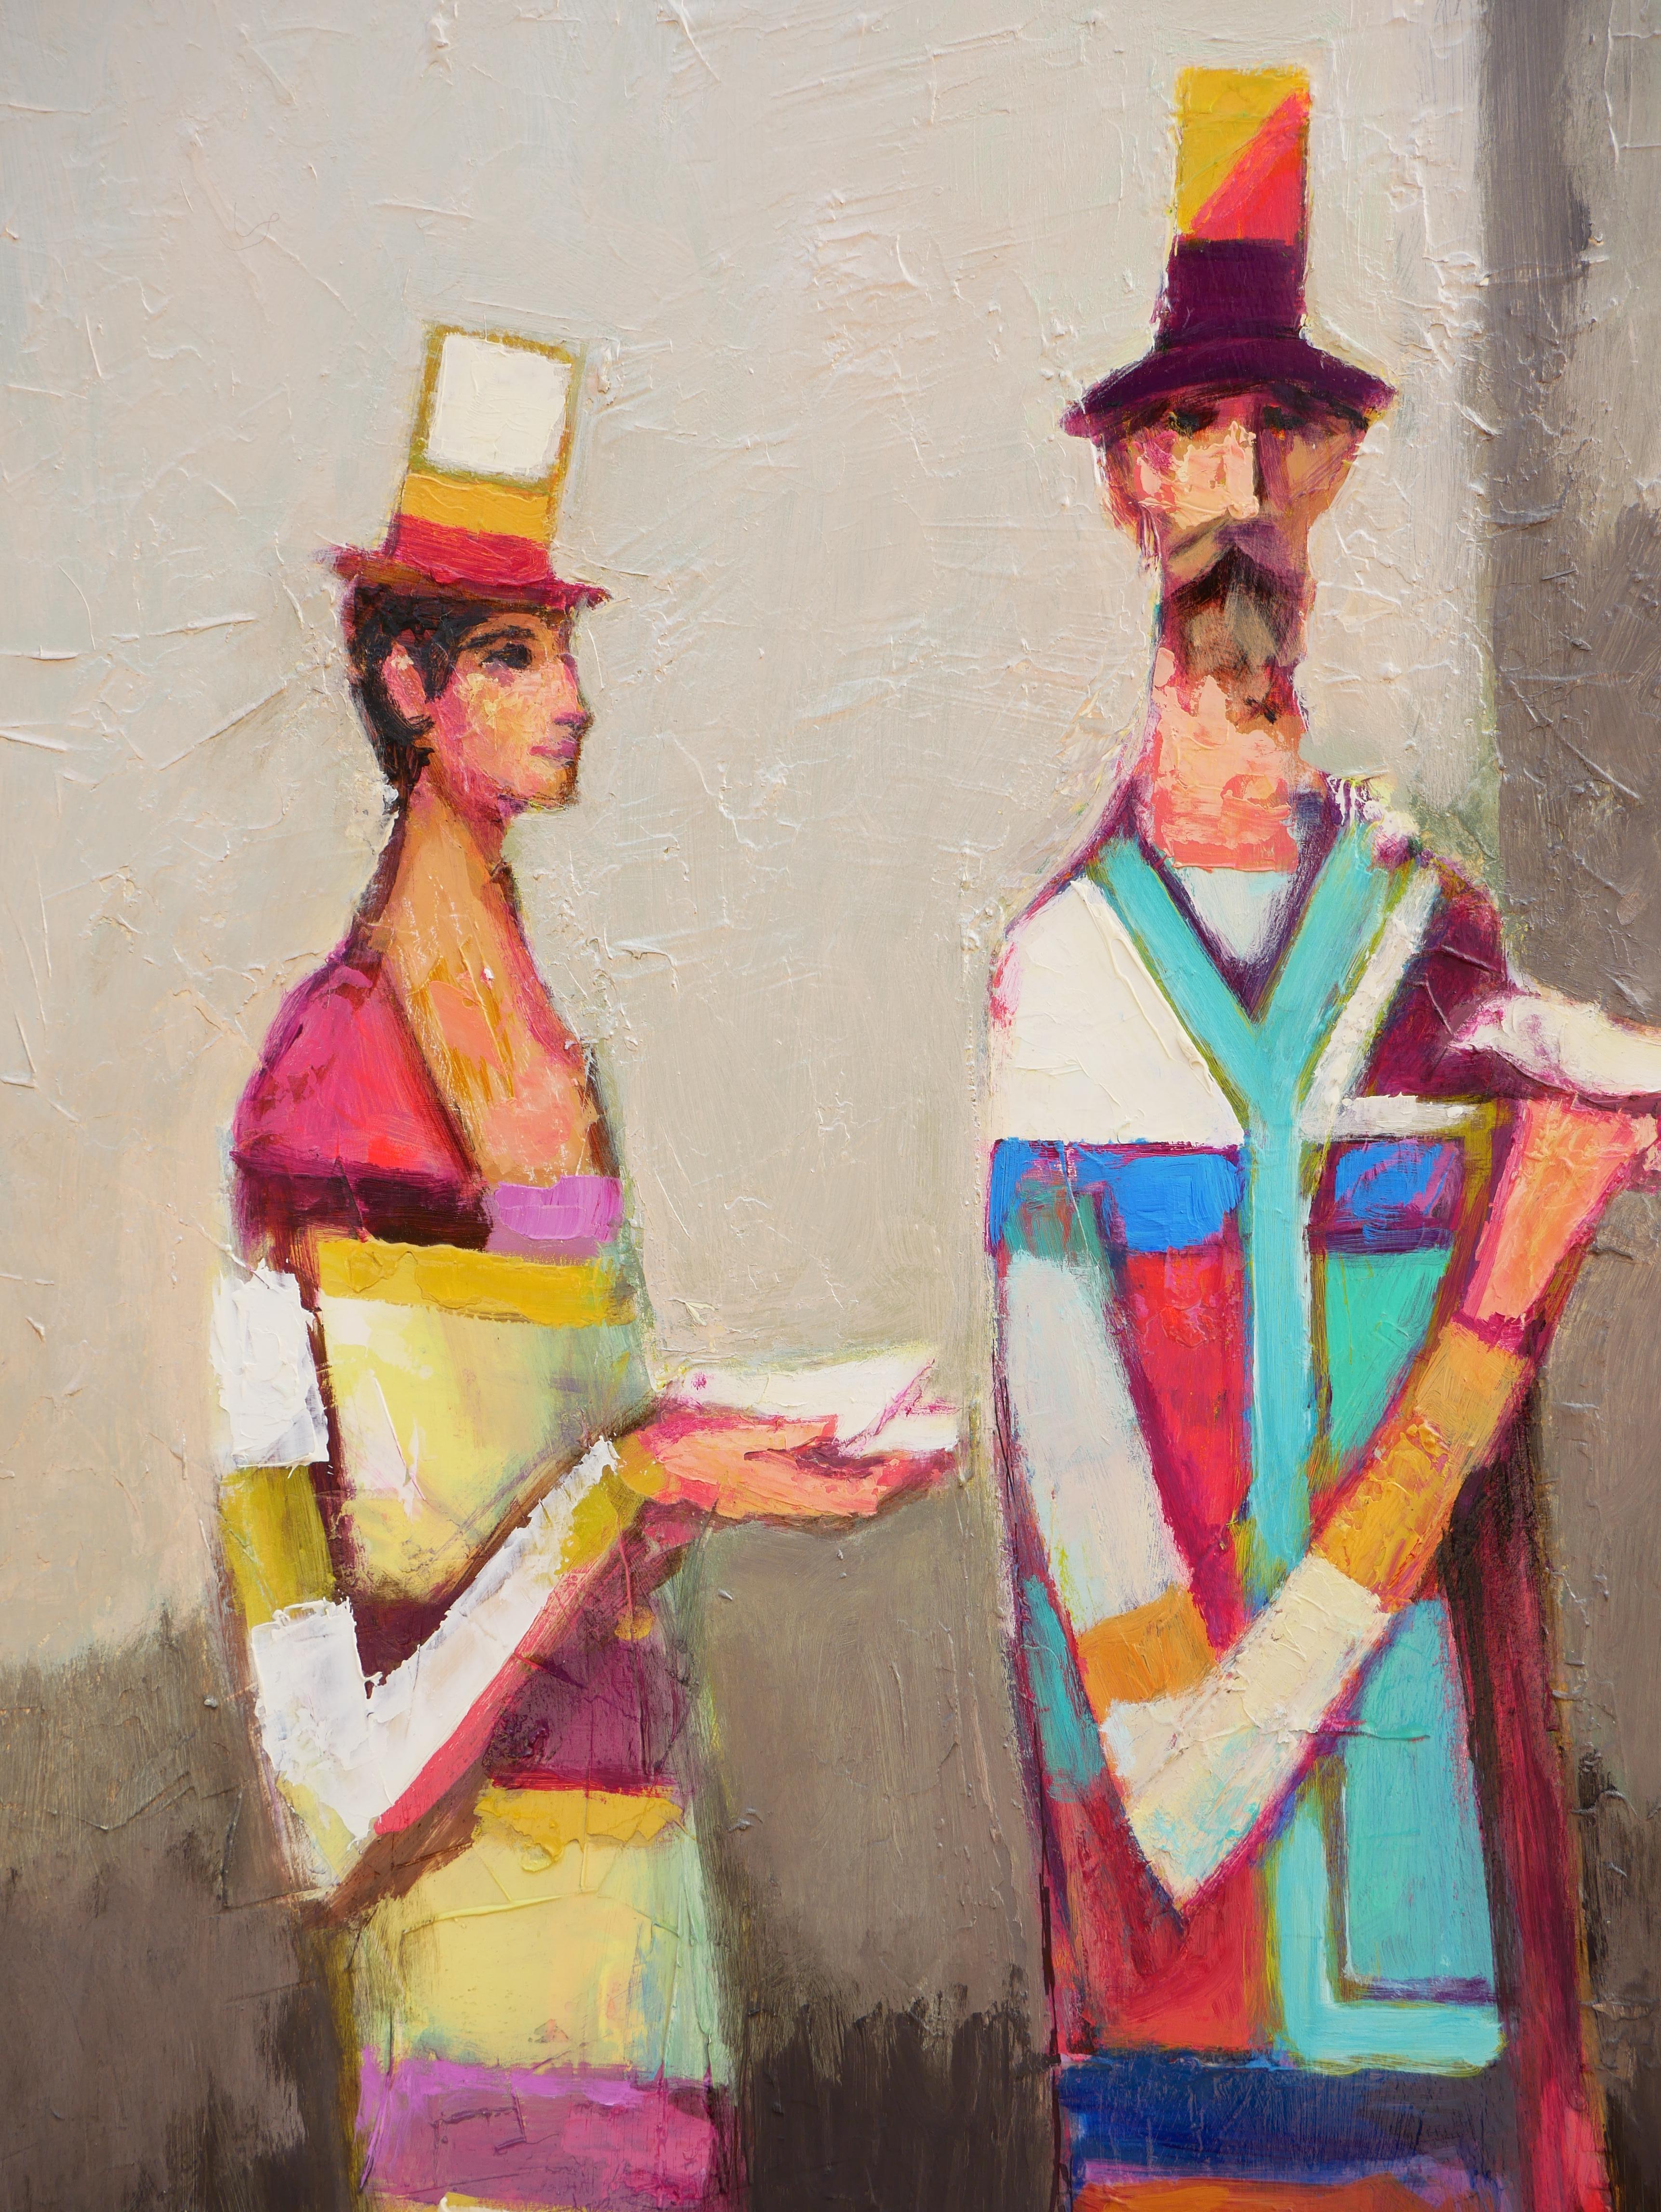 Modern abstract figurative portrait painting by Houston, TX artist David Adickes. The work features a central group of three male figures wearing colorful clothes and hats holding birds set against a neutral toned background. Signed by the artist in